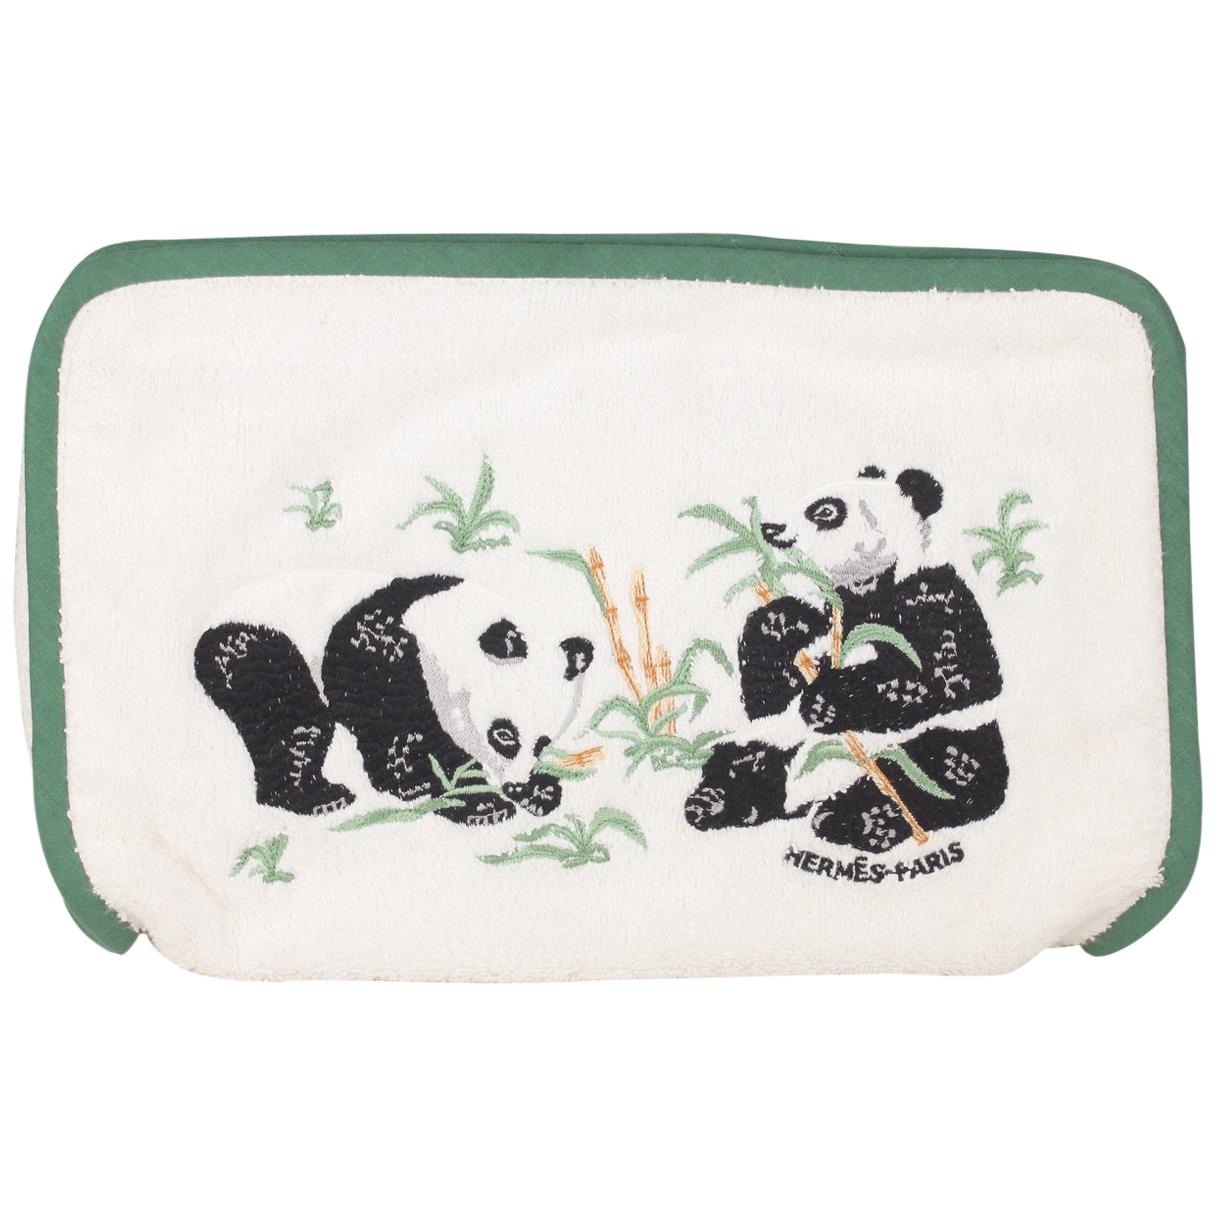 Hermes Paris White Terry Cloth Cotton Cosmetic Bag with Panda